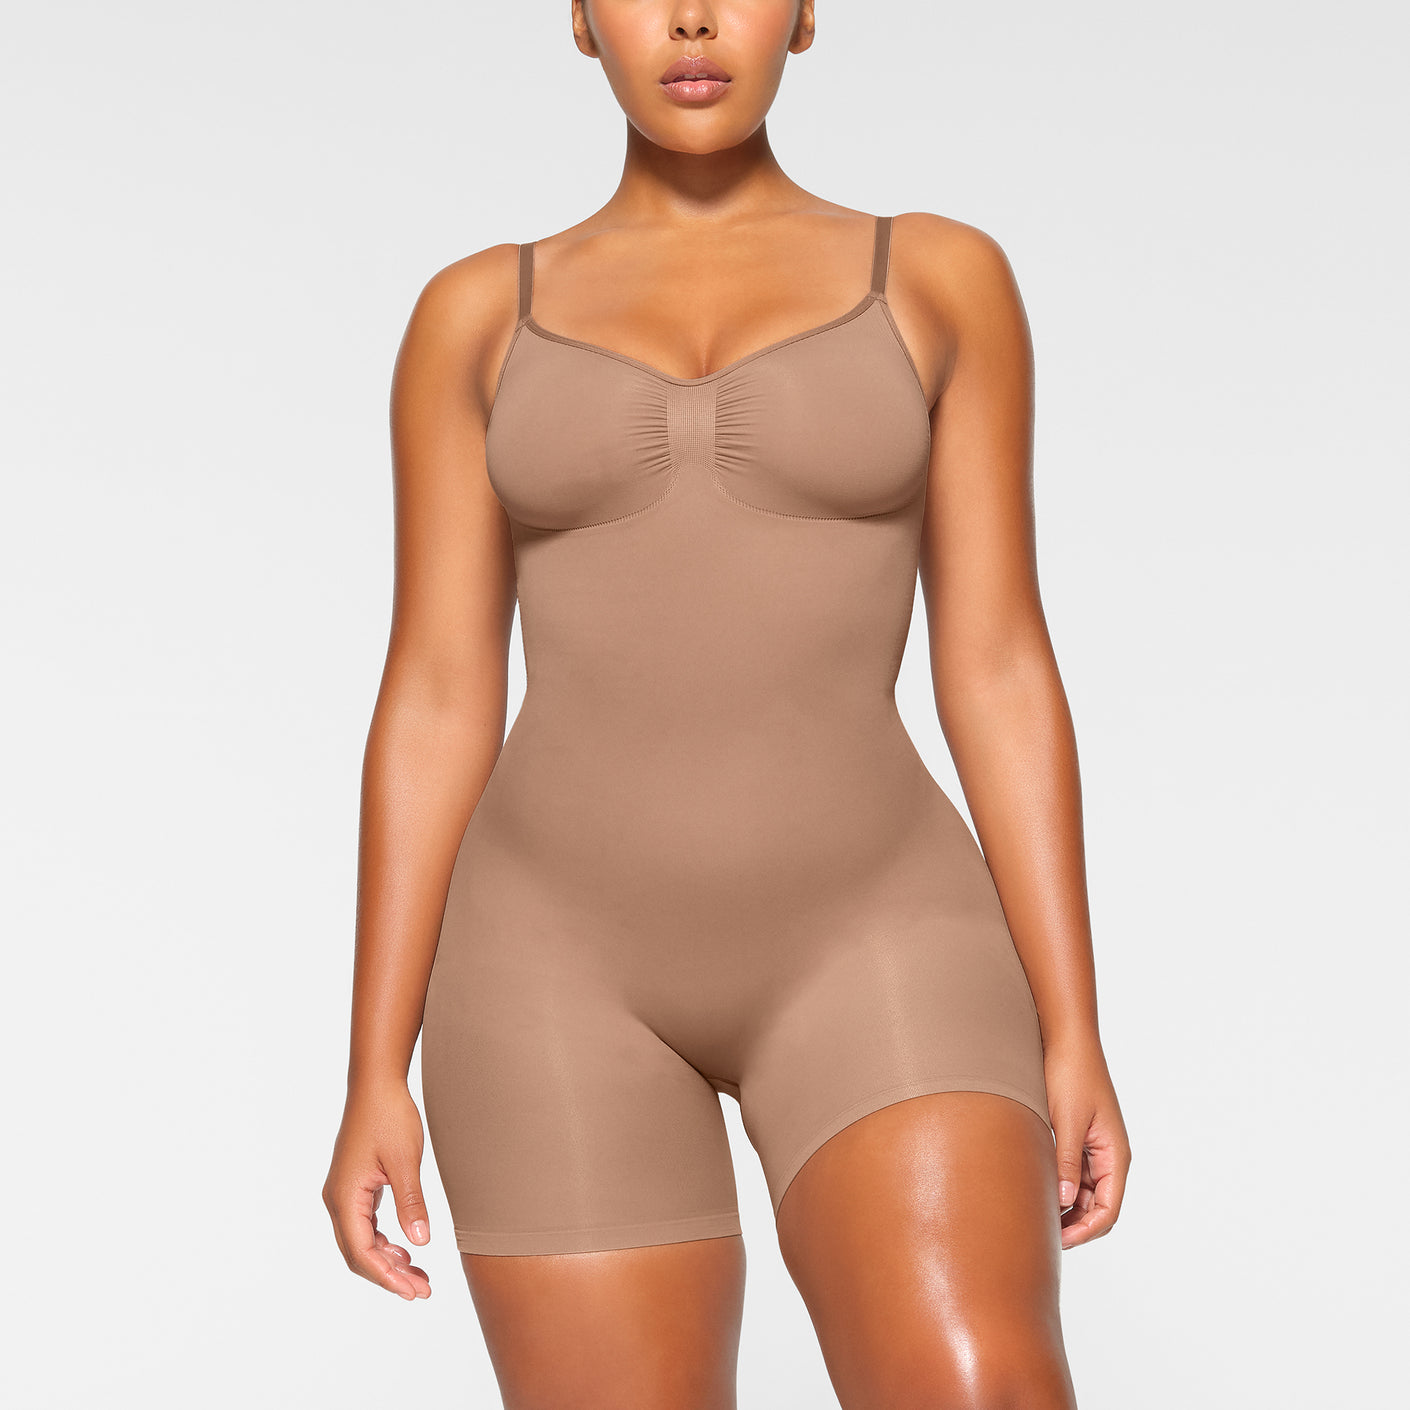 Trying the new @skims seamless sculpt bodysuit - Size Medium (previous